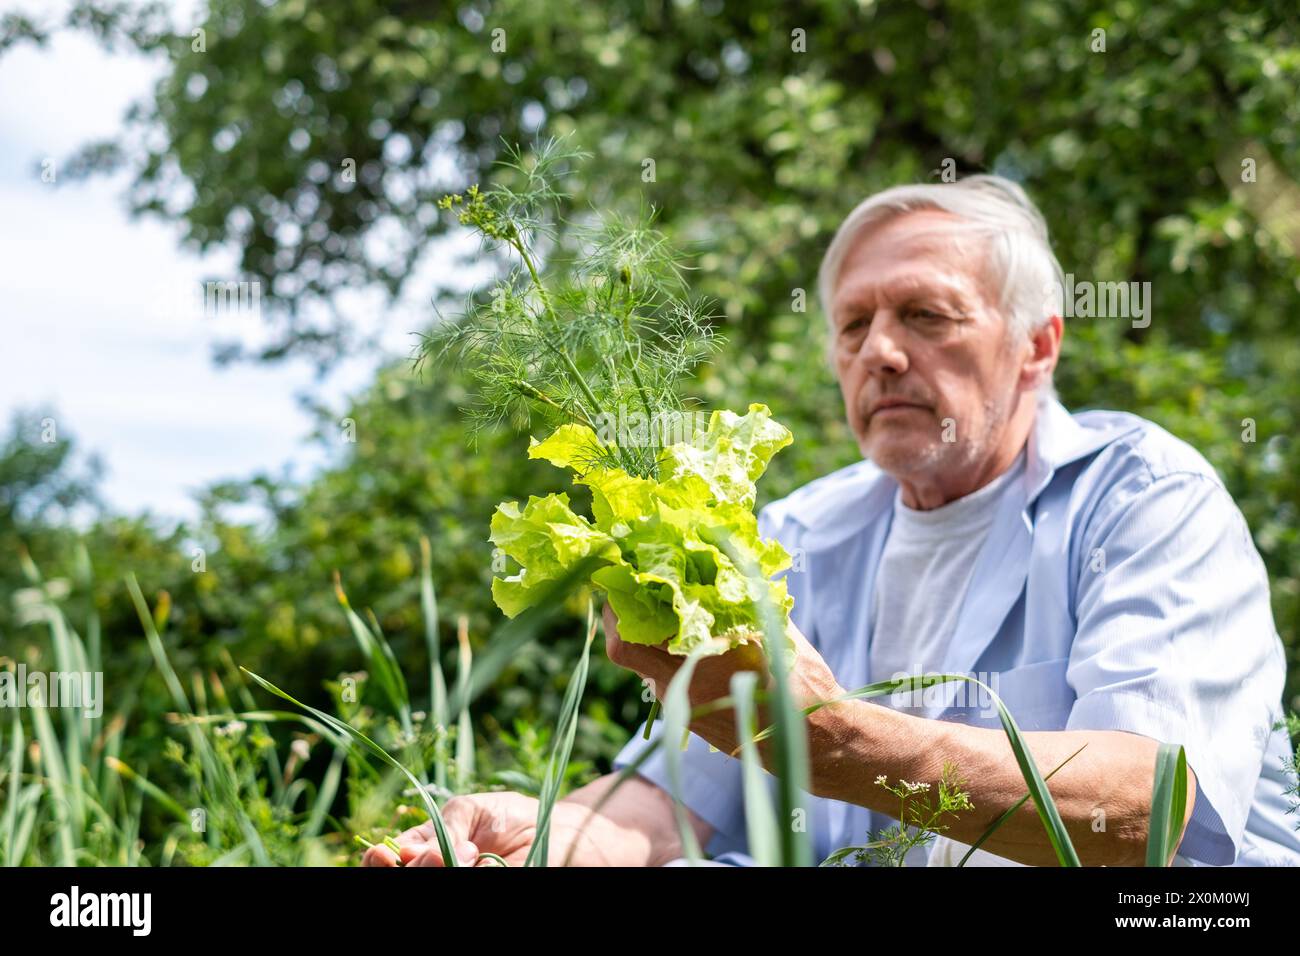 A man of advancing years enjoys the simple pleasure of holding fresh garden greens, embodying a peaceful retirement activity. High quality photo Stock Photo